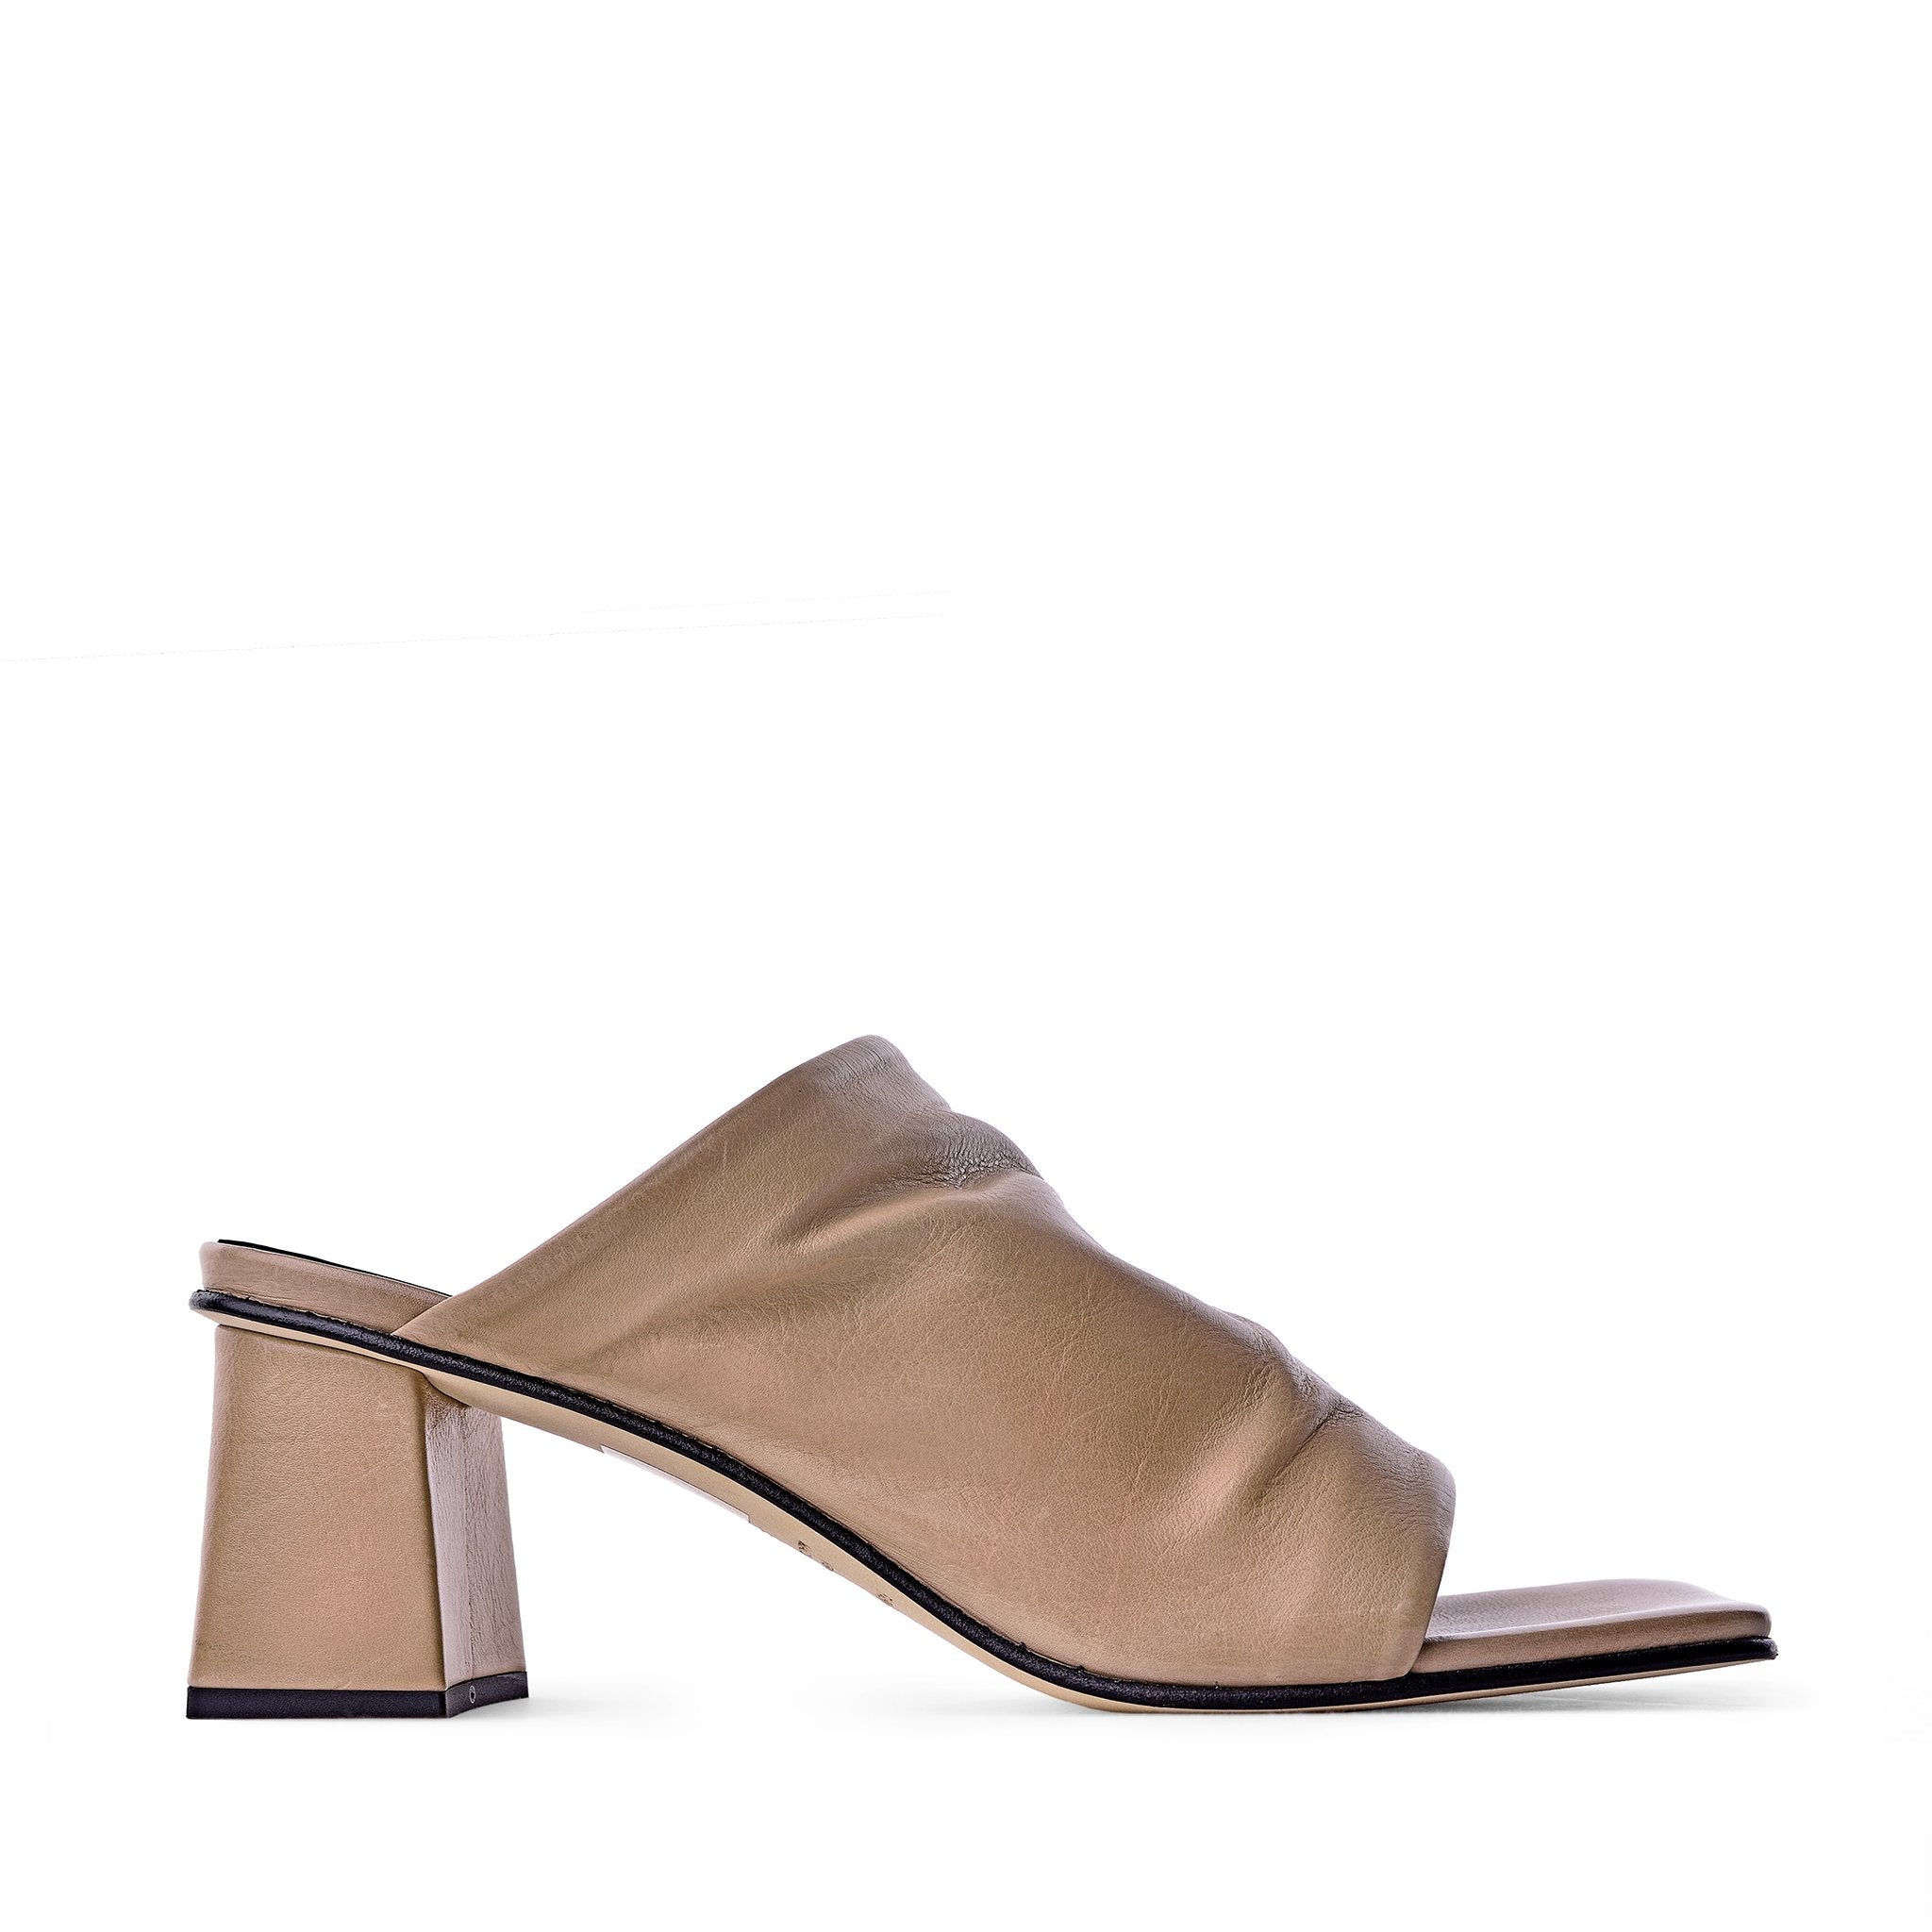 Virgi Taupe Leather Sandals 1280 - 1